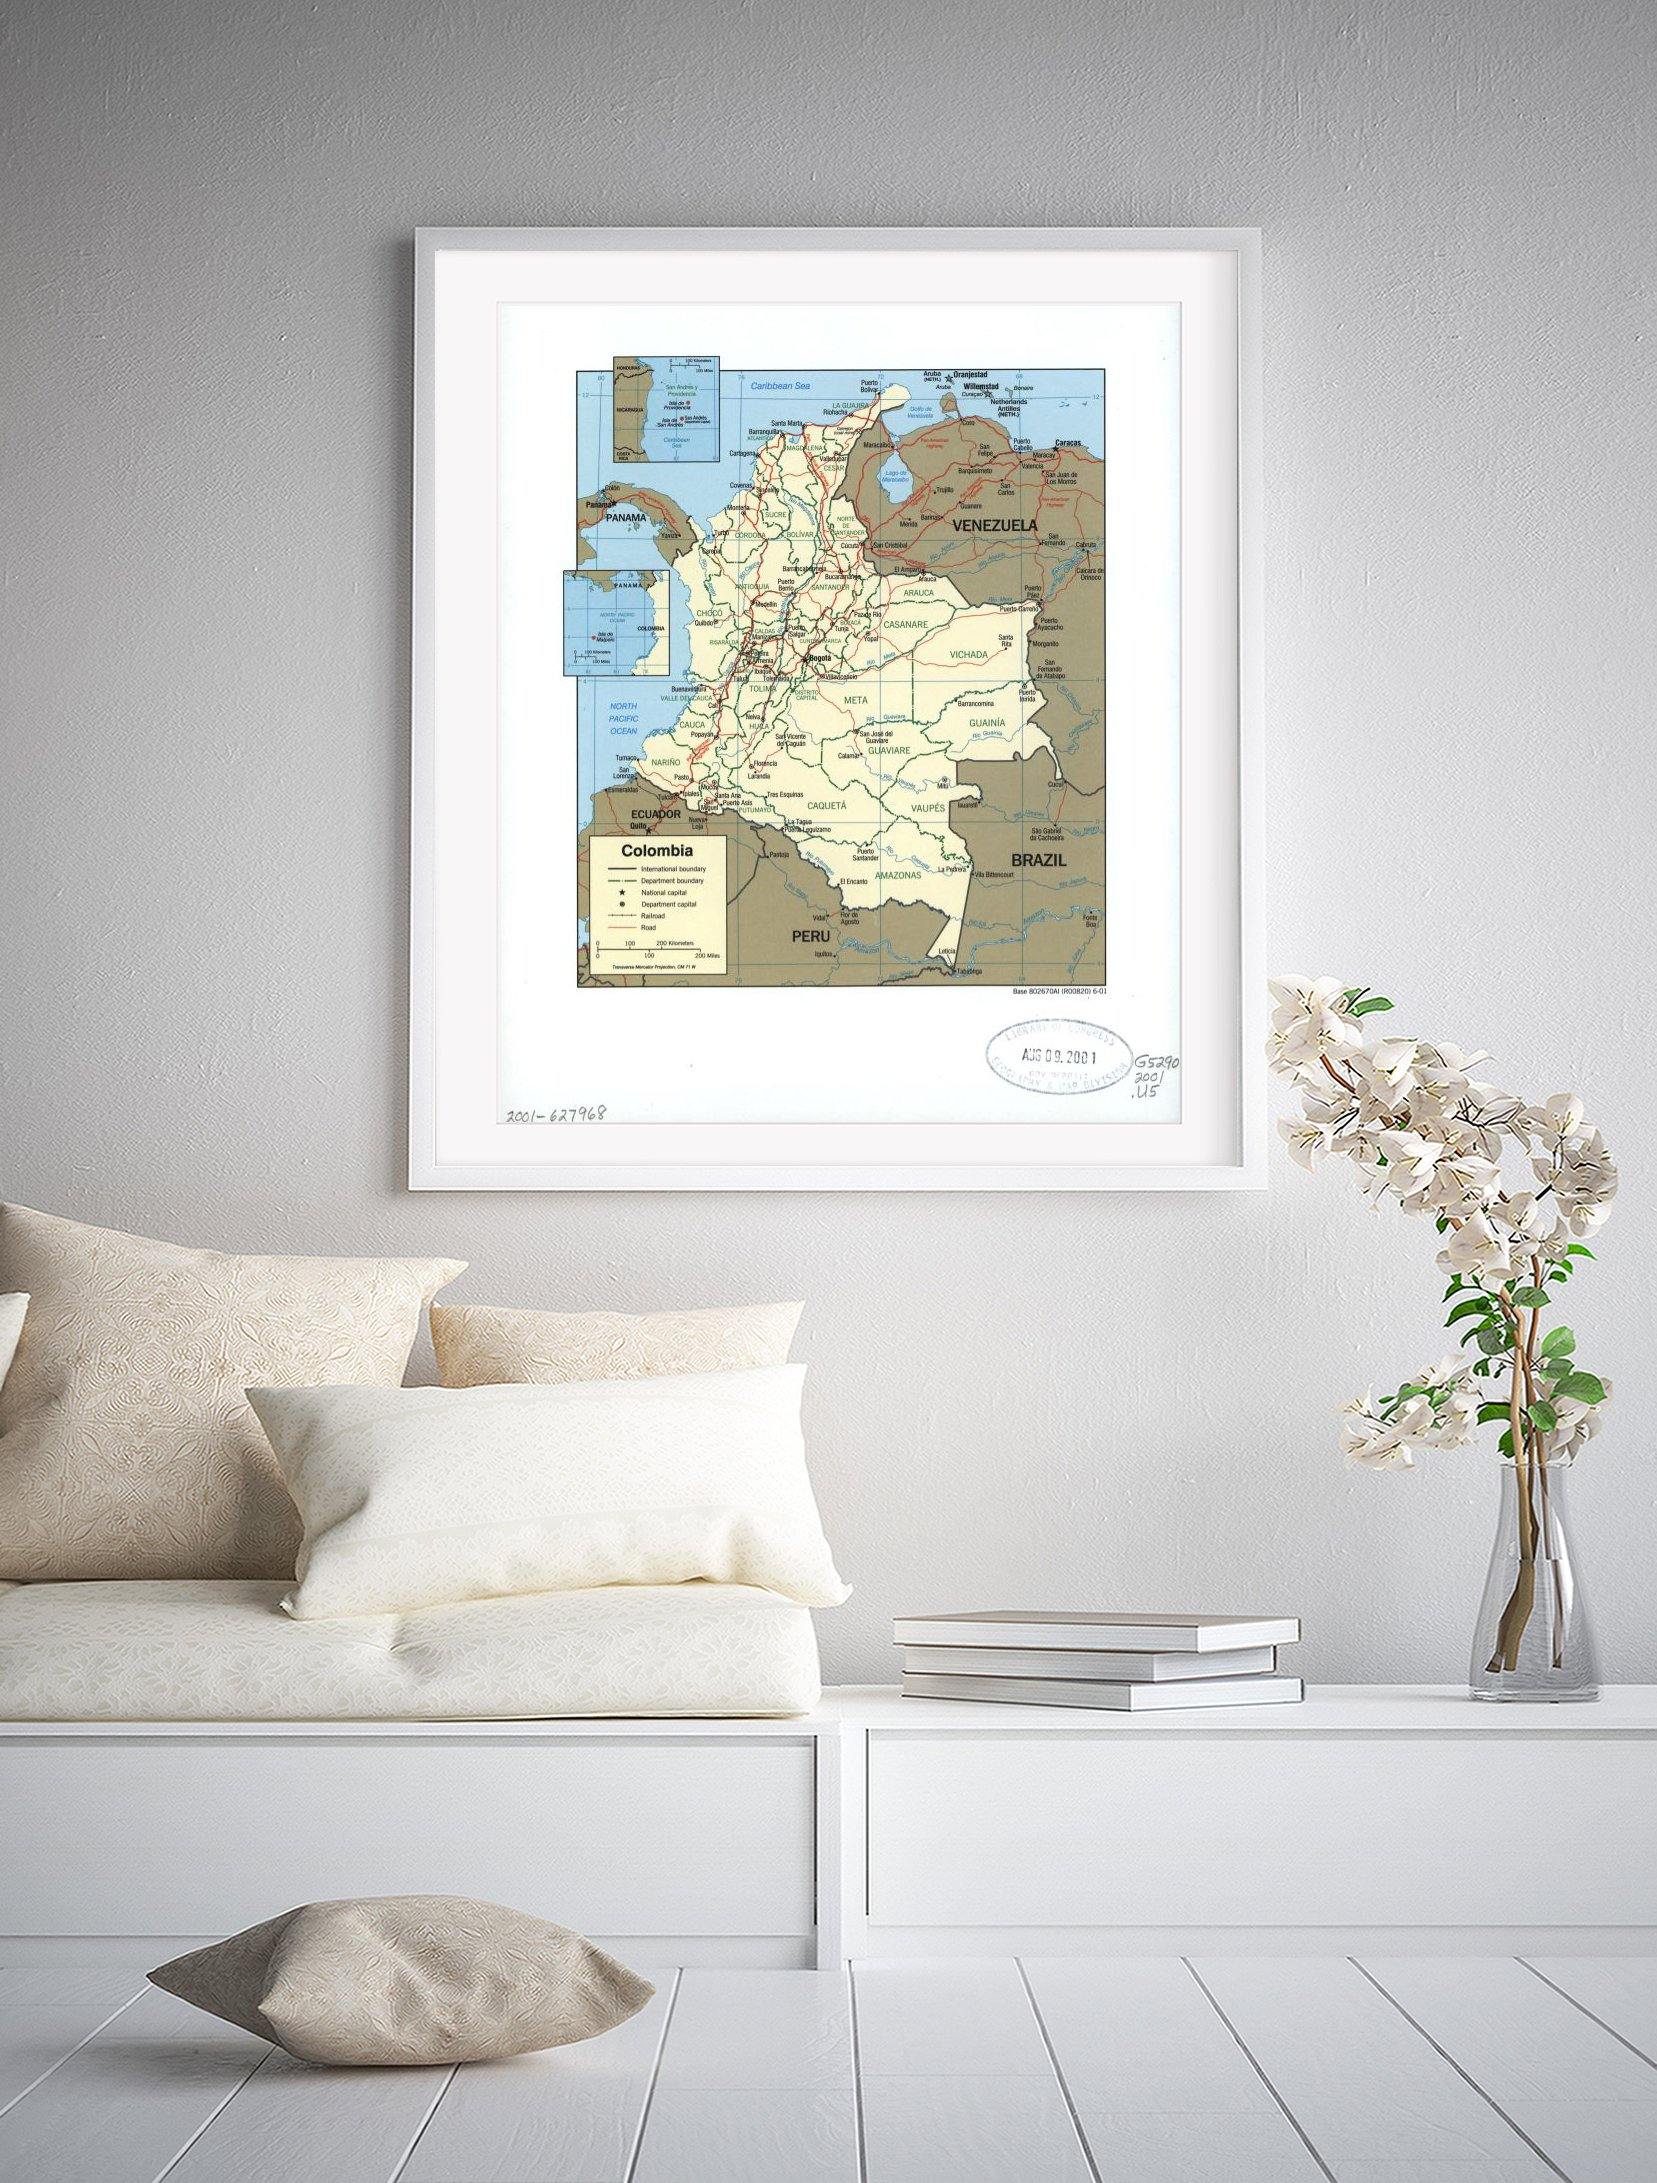 2001 Map| Colombia| Colombia Map Size: 20 inches x 24 inches |Fits 20x - New York Map Company